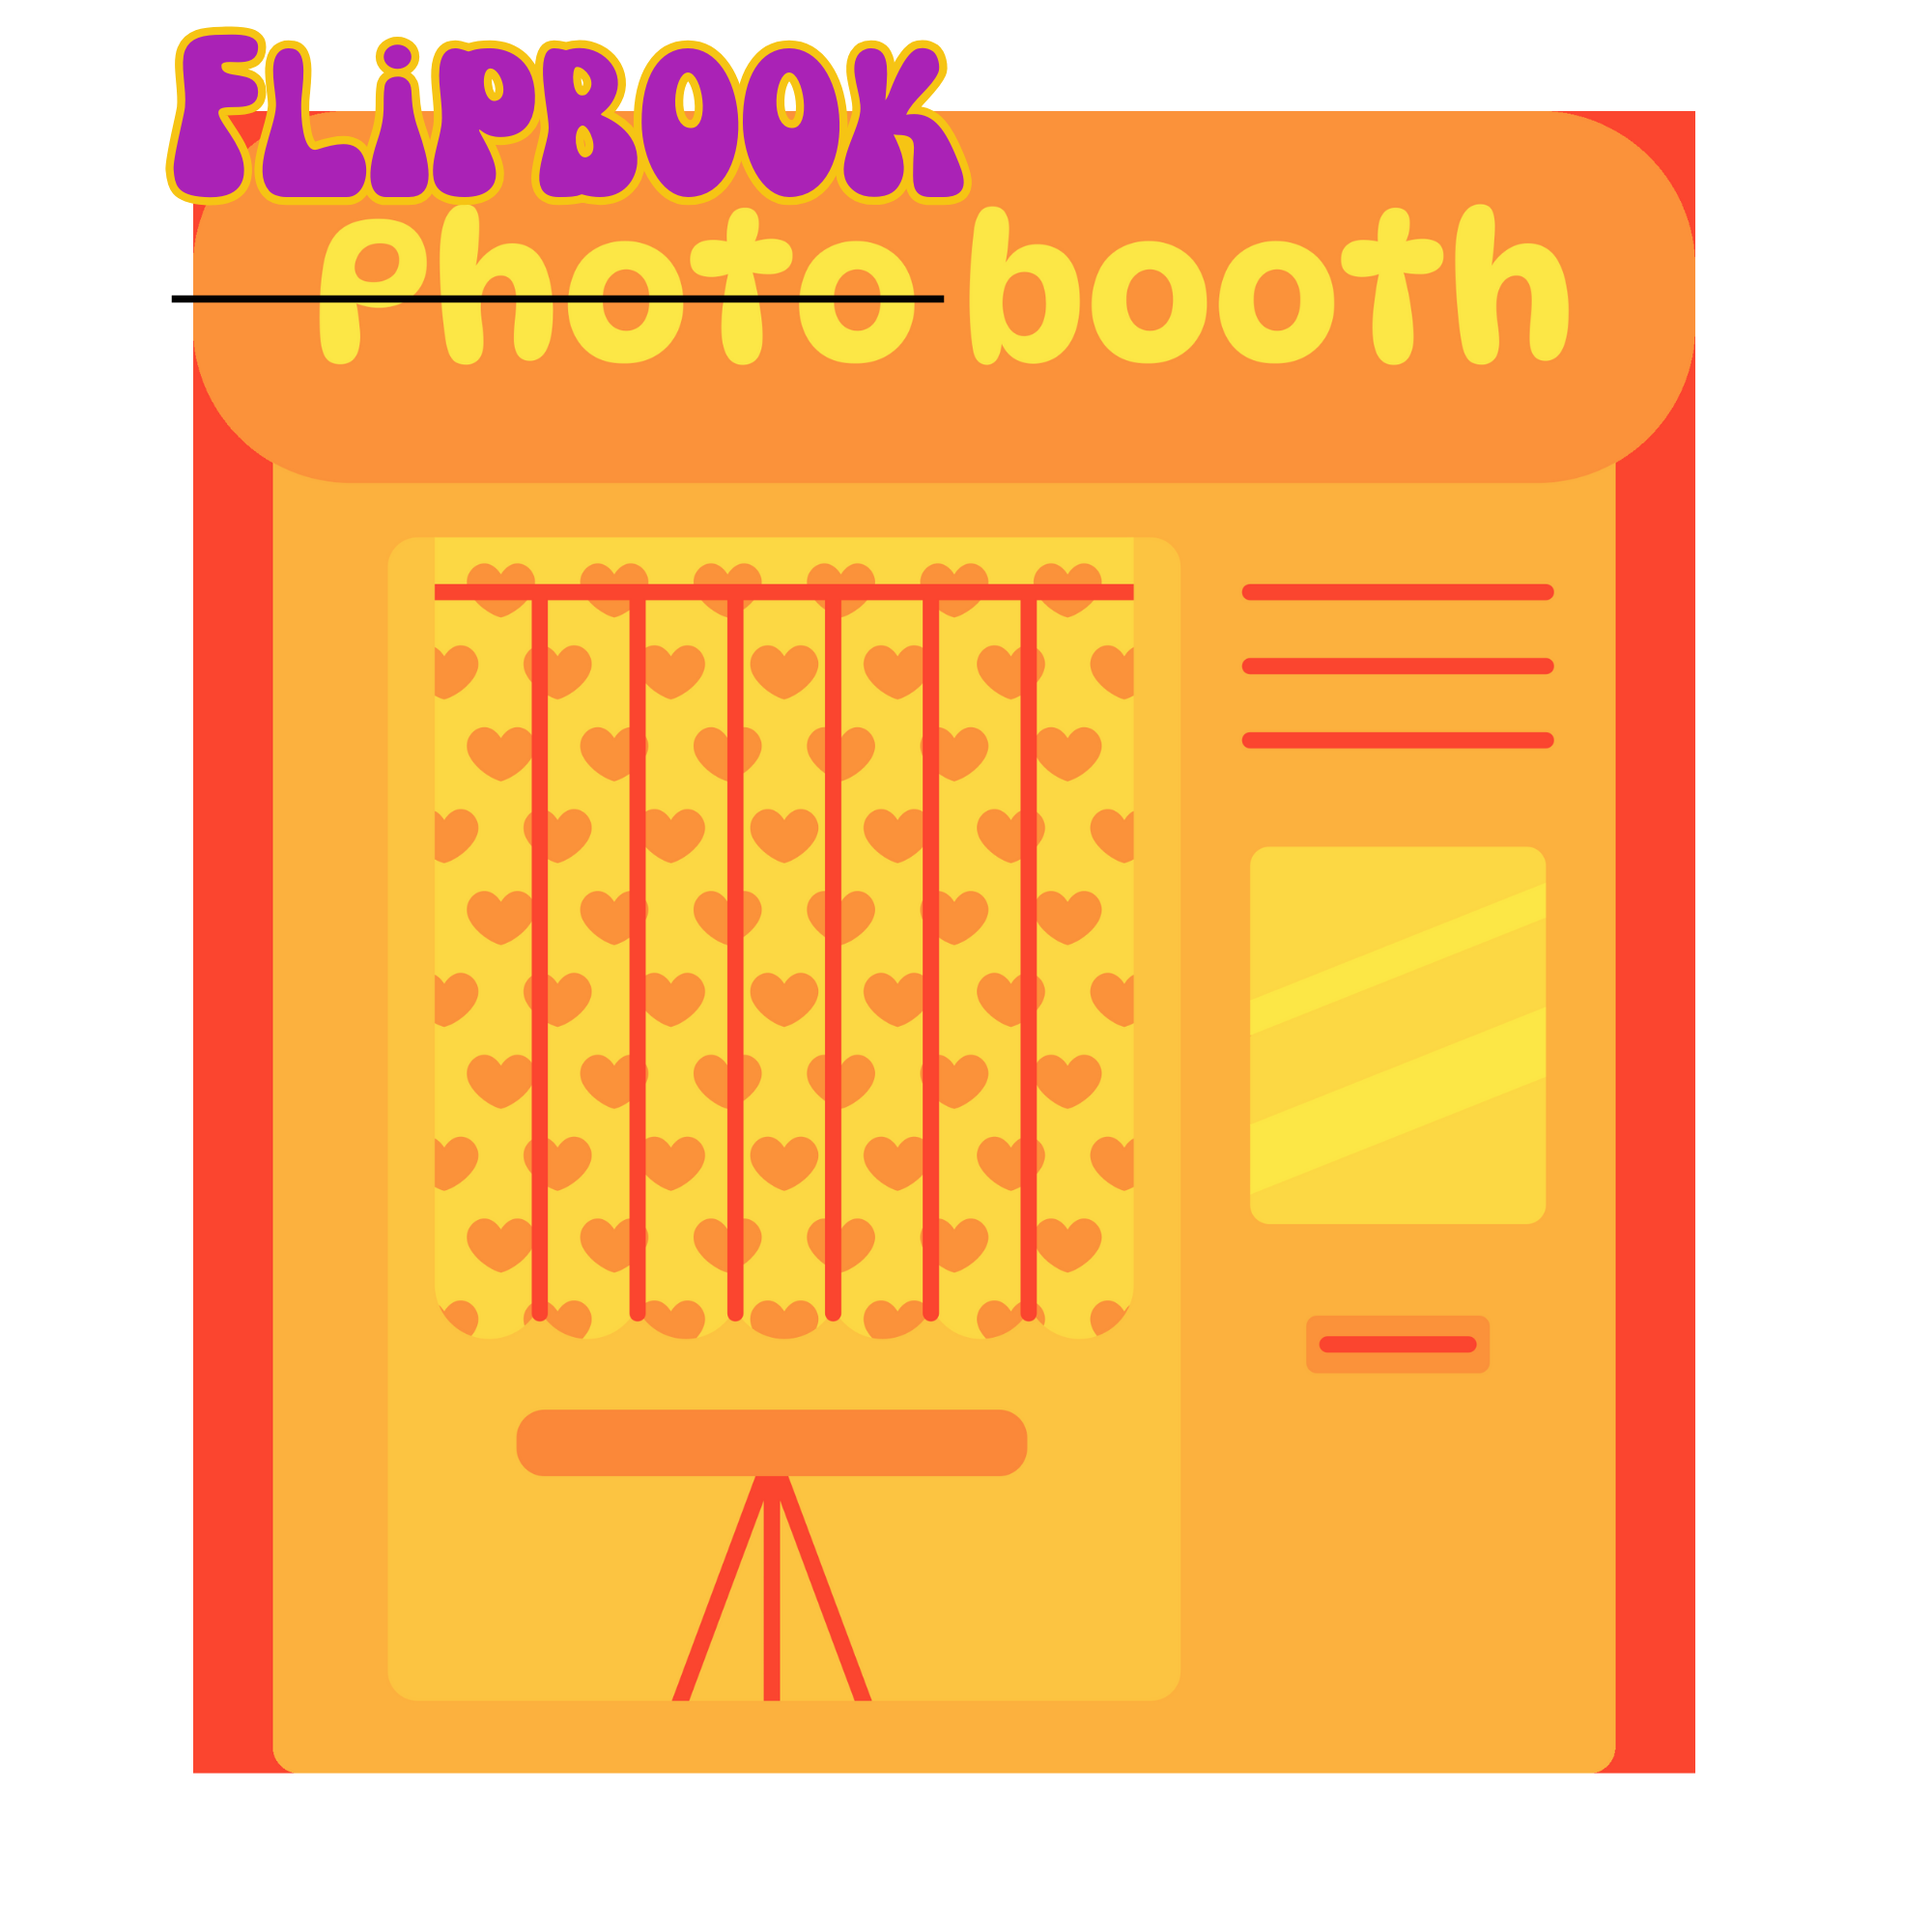 Flipbook Booth graphic